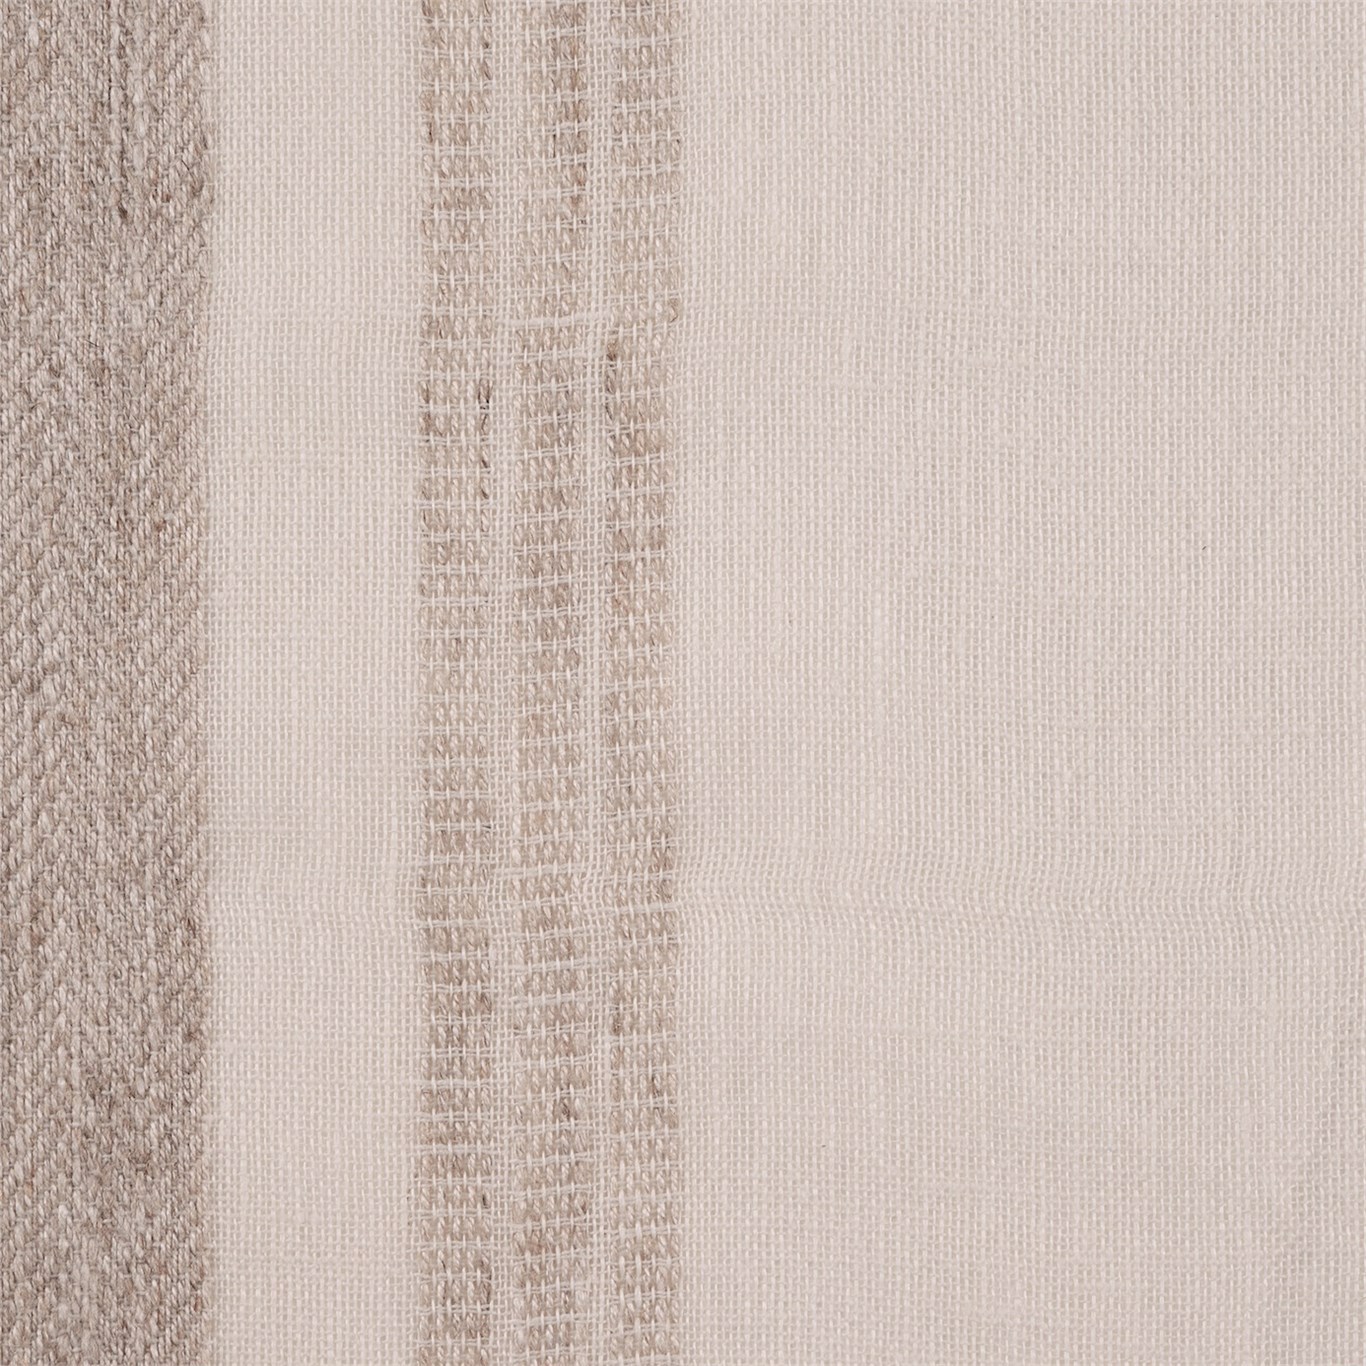 Purity Voiles Ecru Fabric by HAR